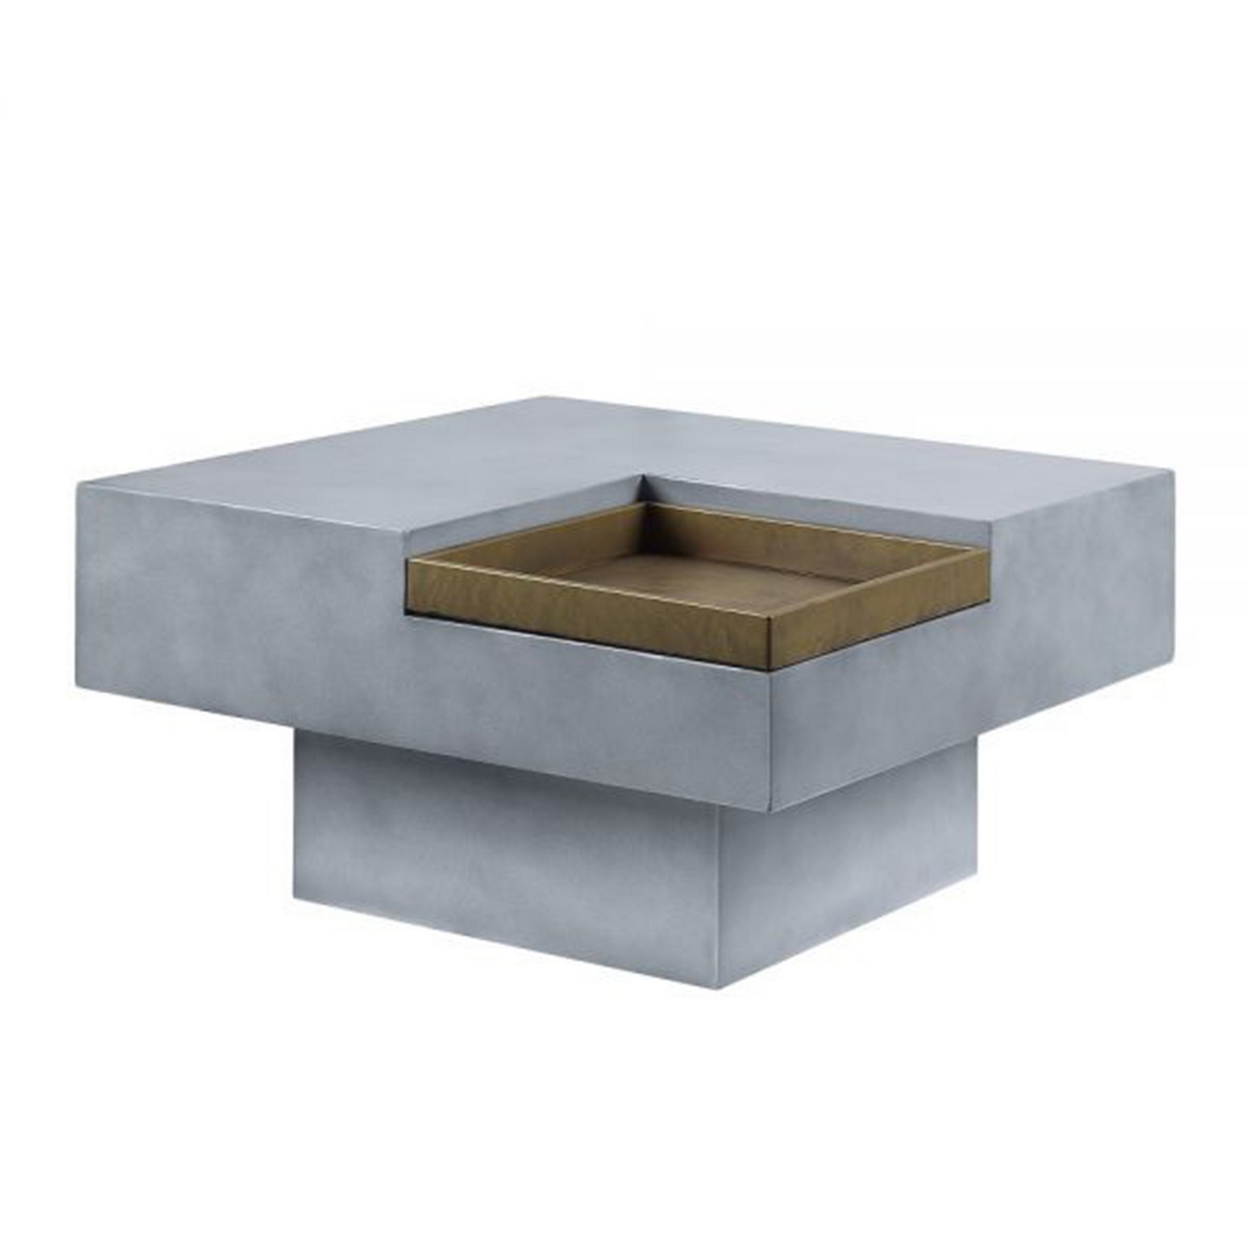 32 Inch Coffee Table With Removable Tray, Cement Construction, Smooth Gray - Saltoro Sherpi